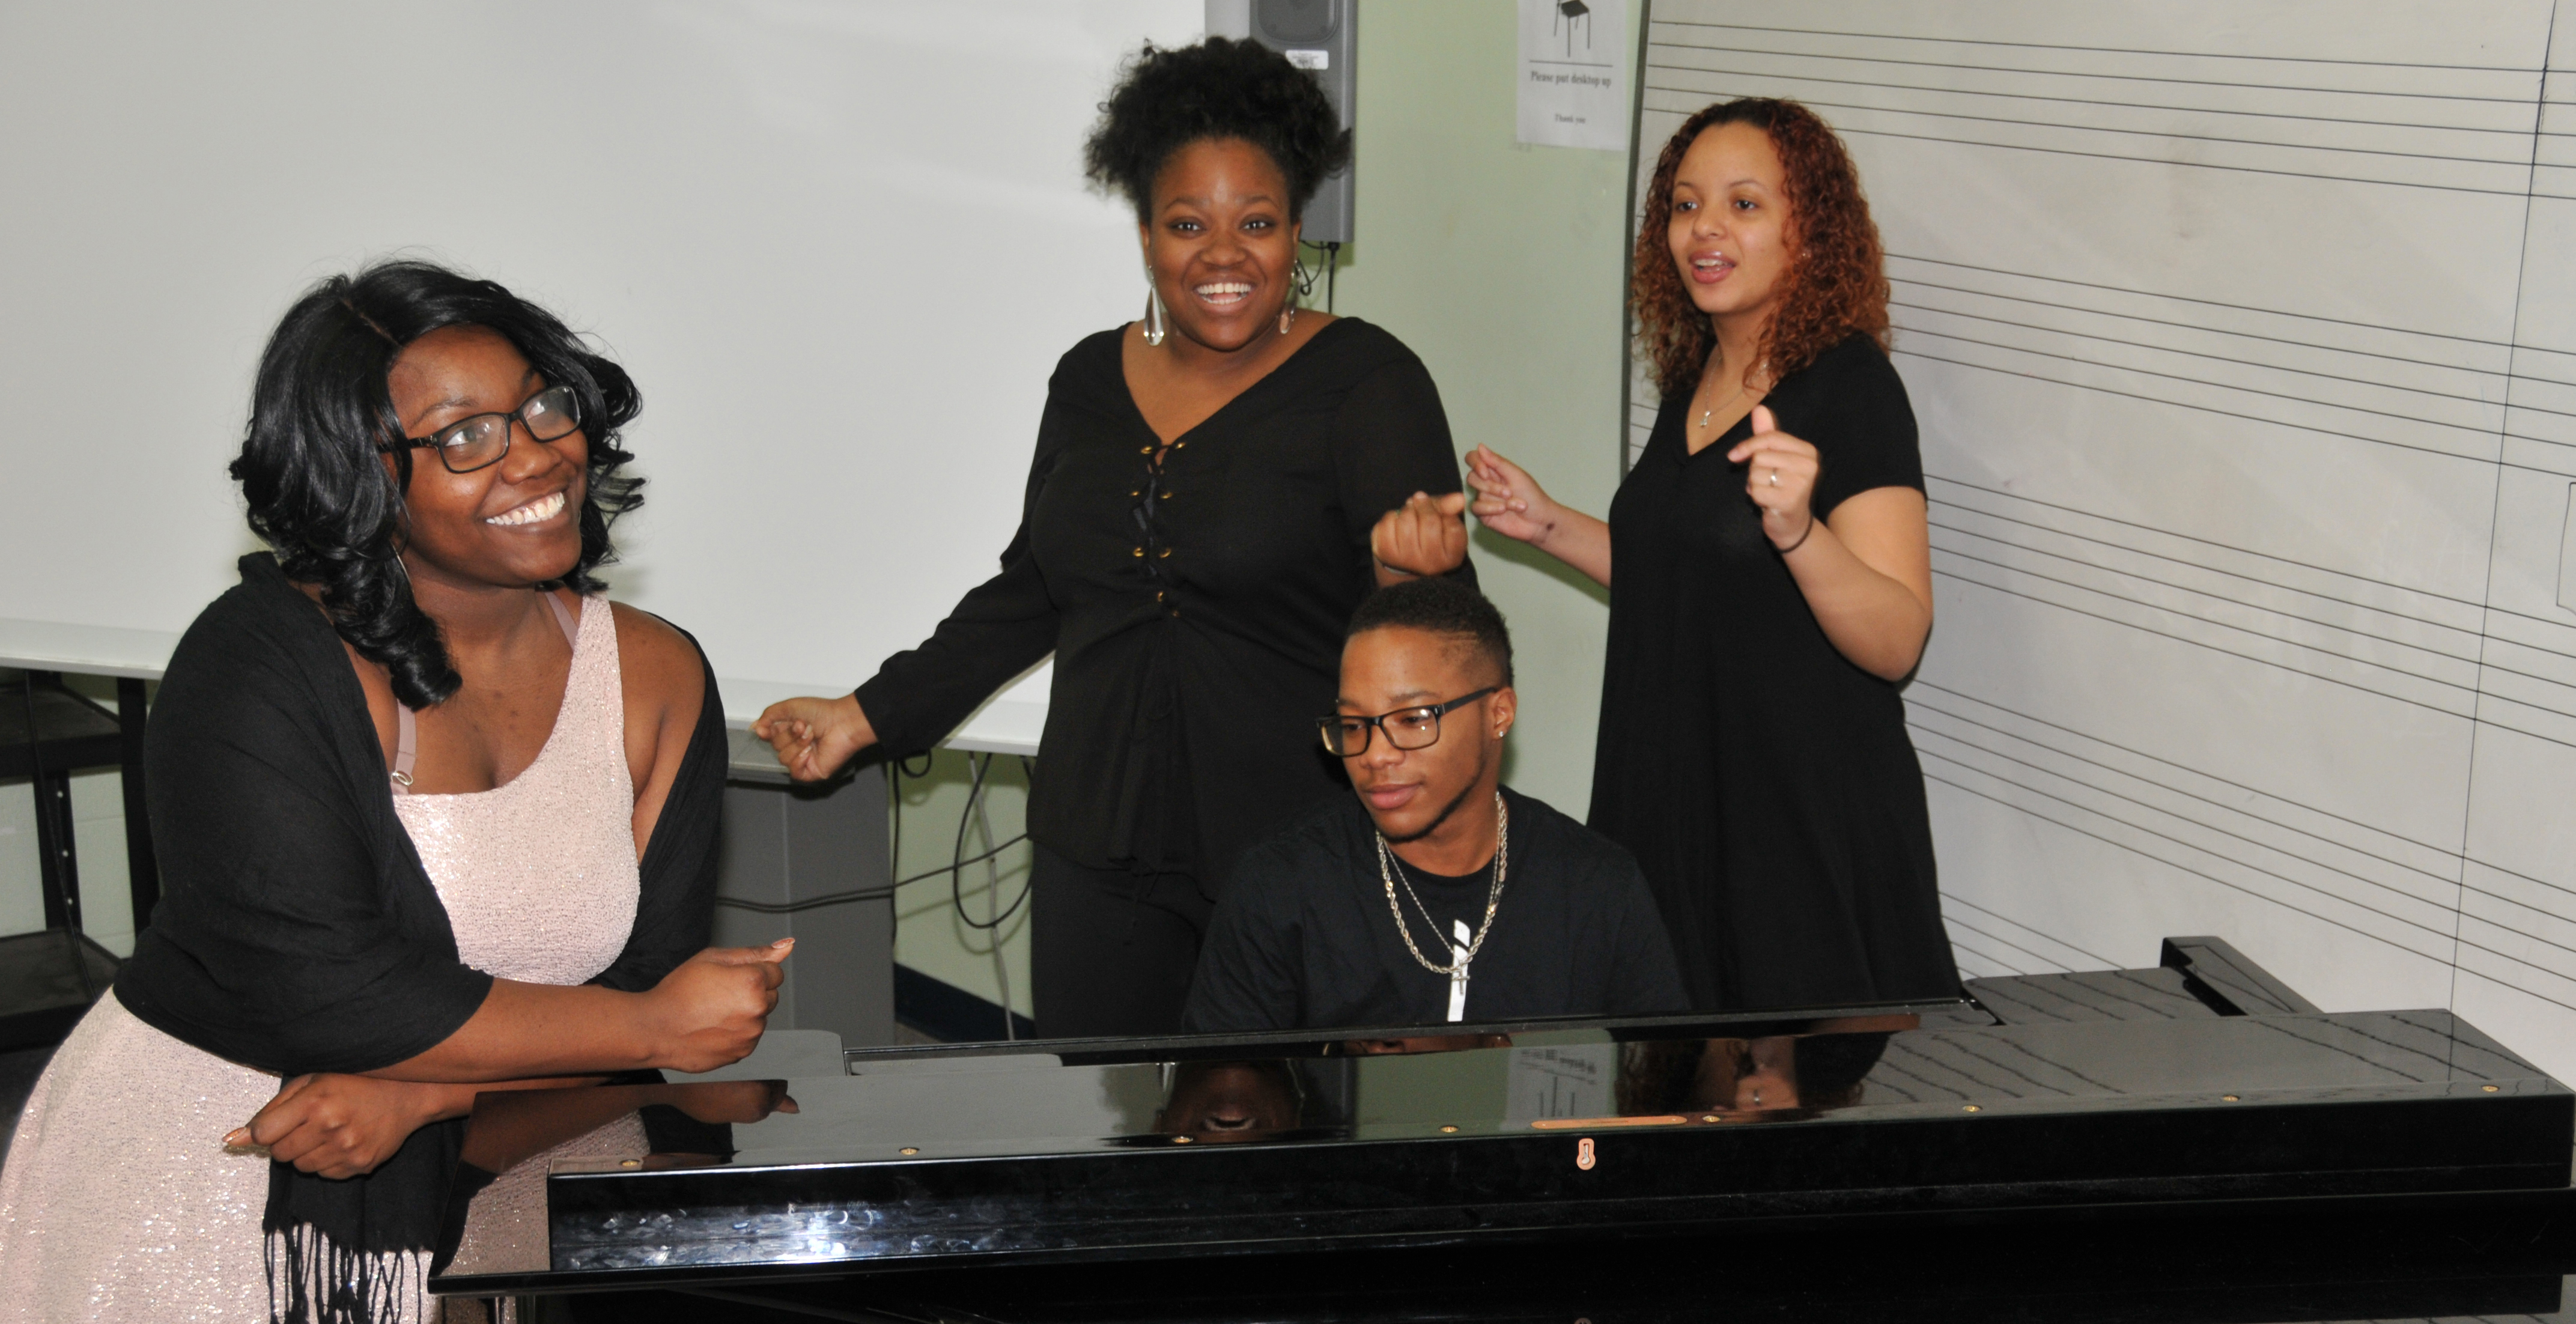 (L-r) Jahselah White, Dana Matthews, Tanneh Morris (at piano) and Sháe Ross rehearse a selection from "The Colored Museum."